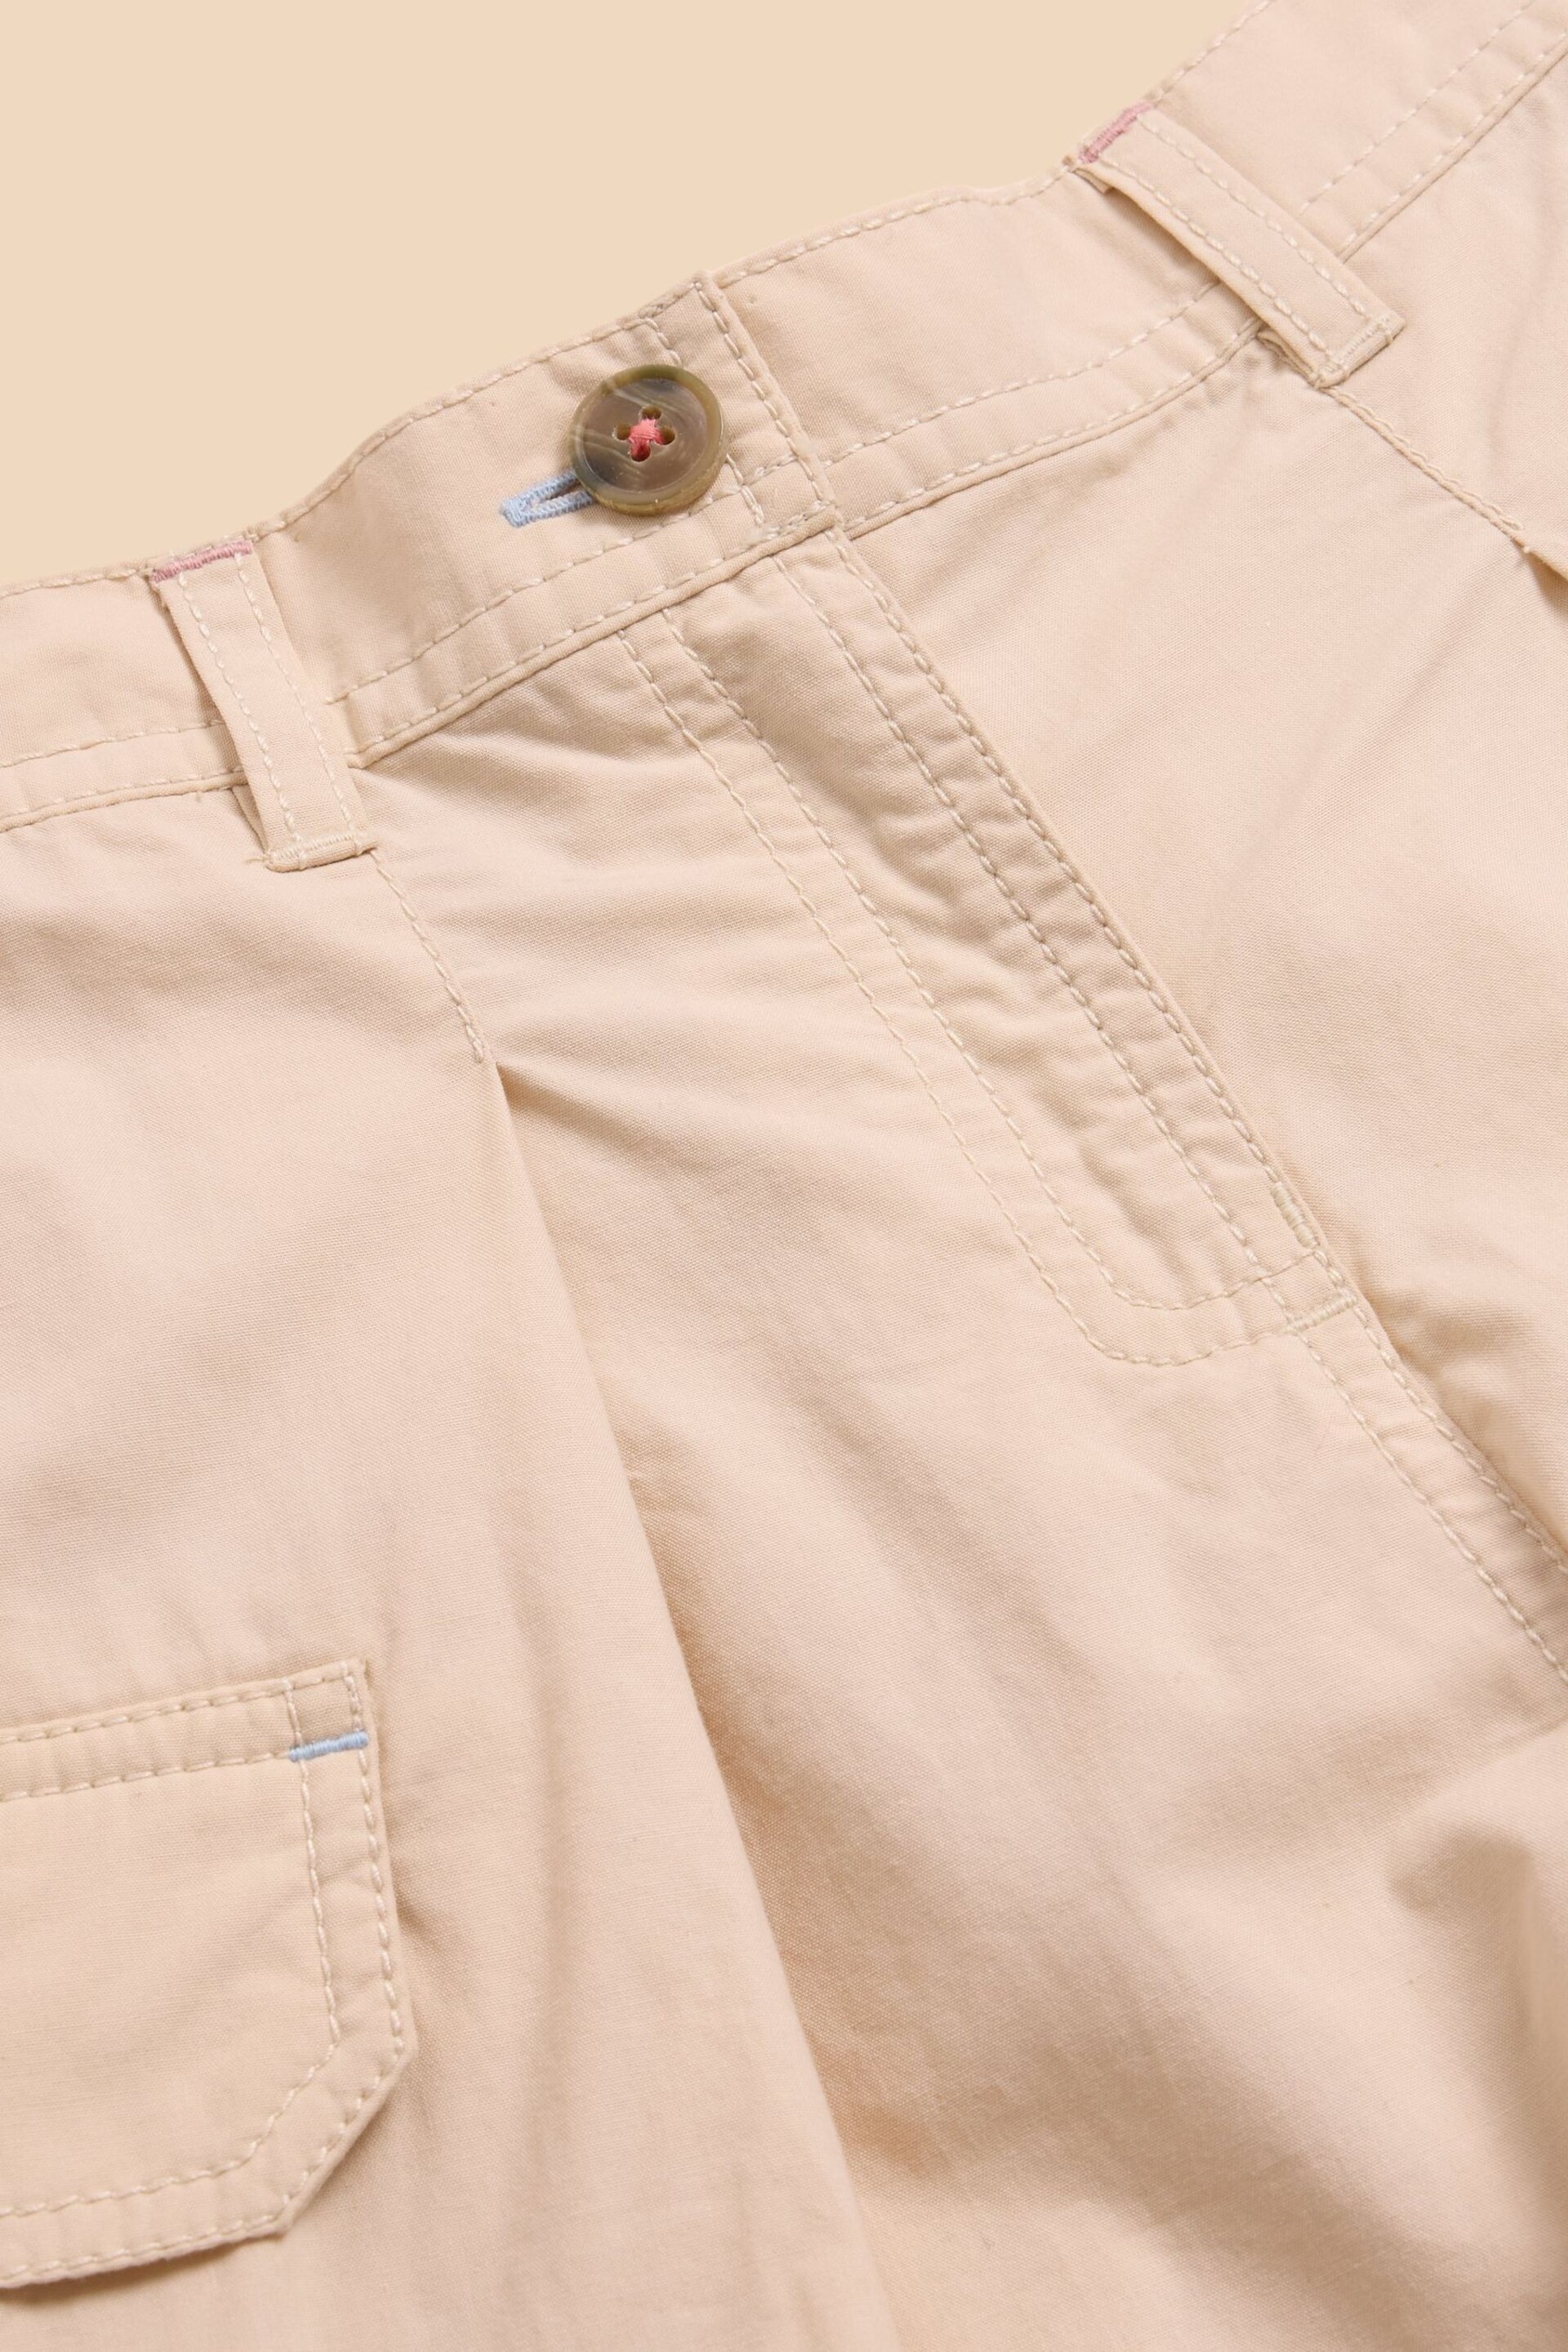 White Stuff Natural Colette Cargo Shorts - Image 3 of 3